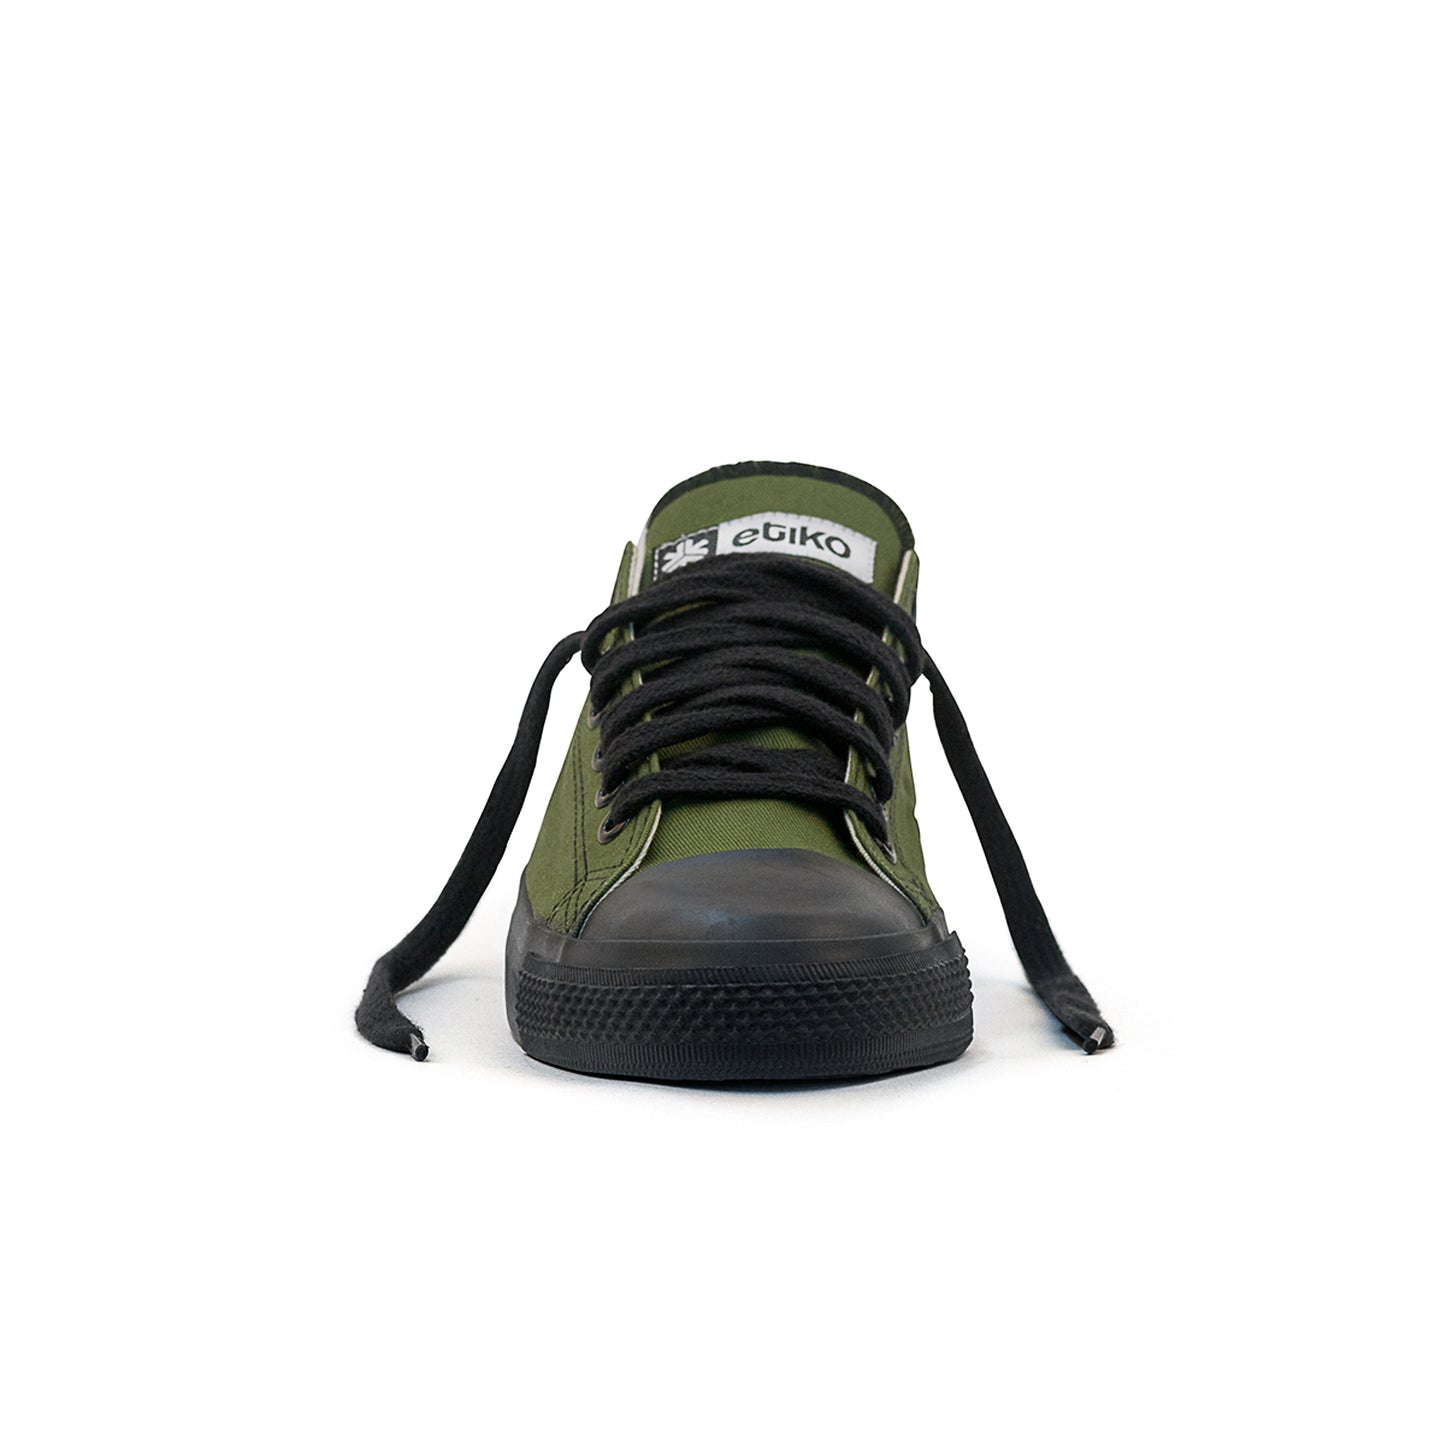 Etiko Vegan Low Cut Olive and Black Sneakers Organic and Fairtrade Certified Ethical Sneakers